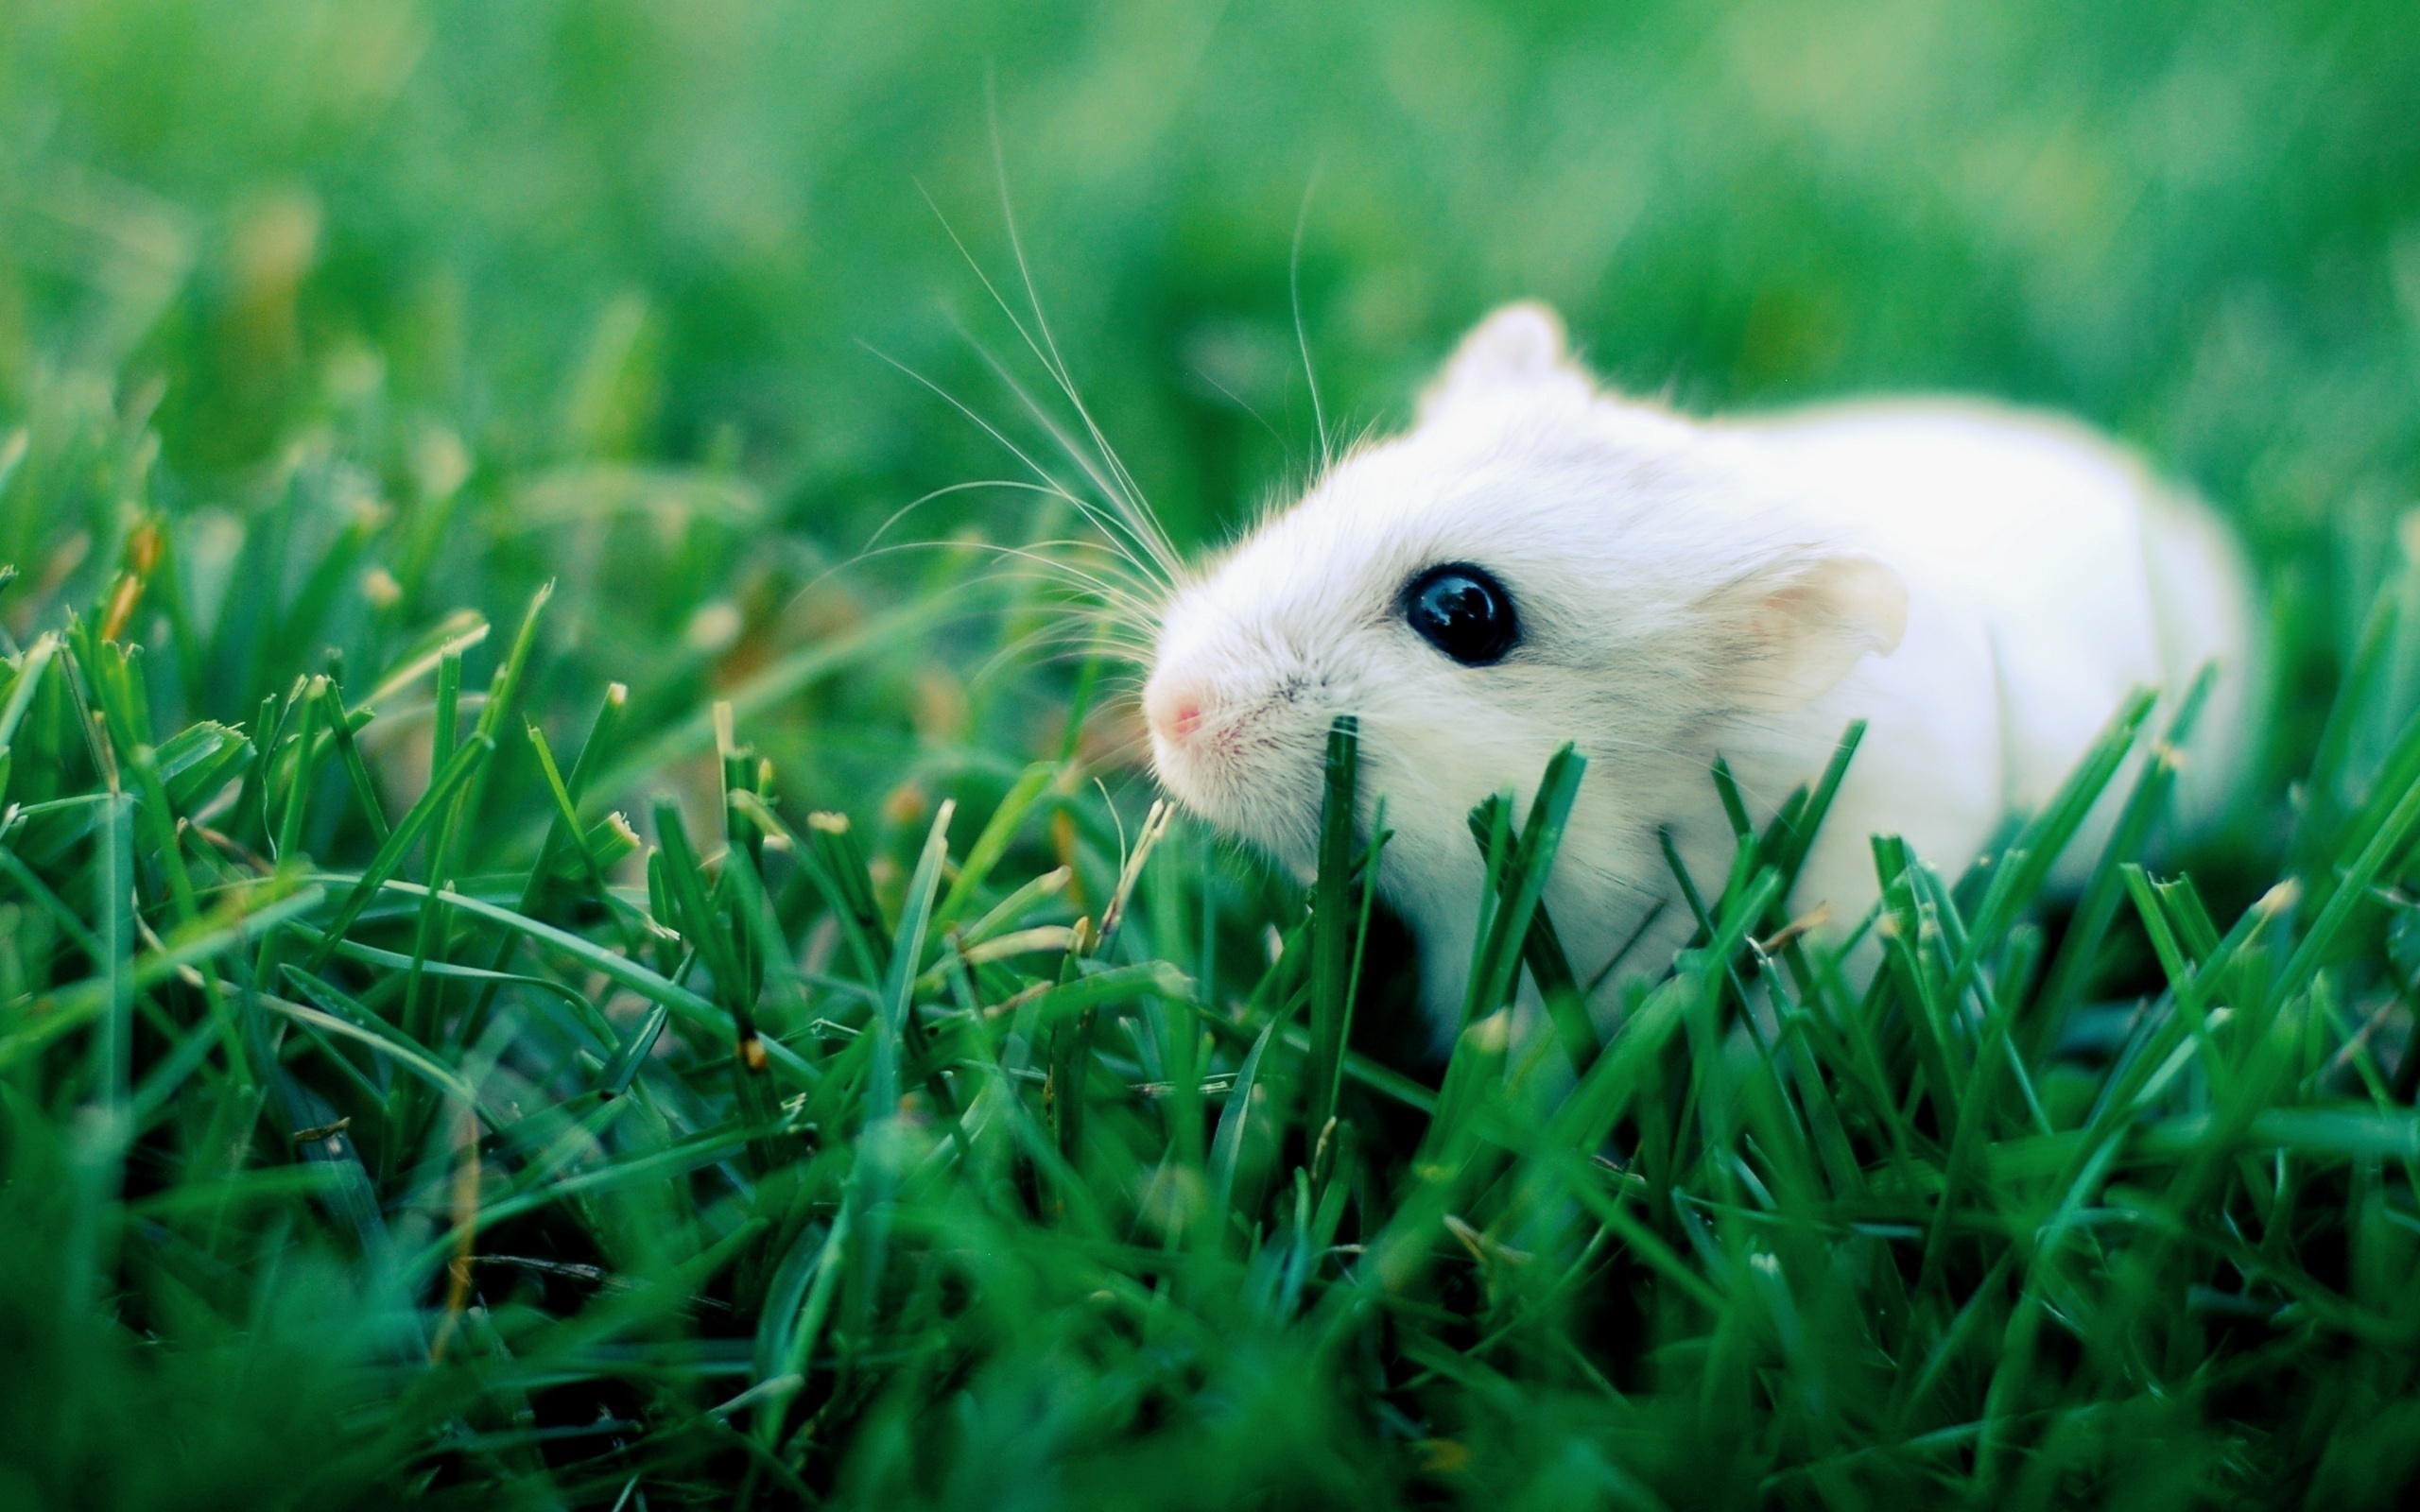 Rodent wallpapers, Mouse in nature, Nature photography, Cute, 2560x1600 HD Desktop